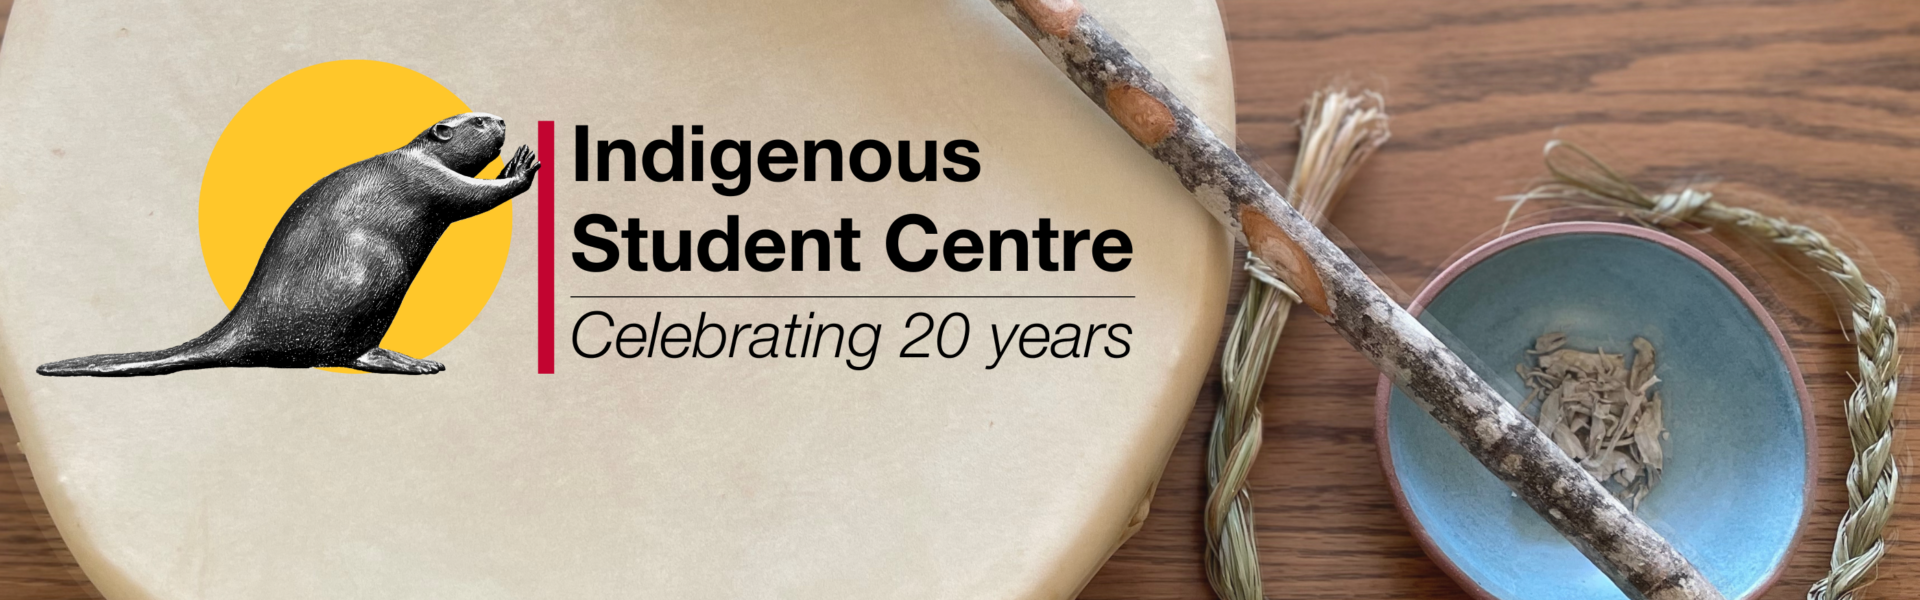 Indigenous student centre celebrating 20 years. Braided sweetgrass and some sage in a bowl.